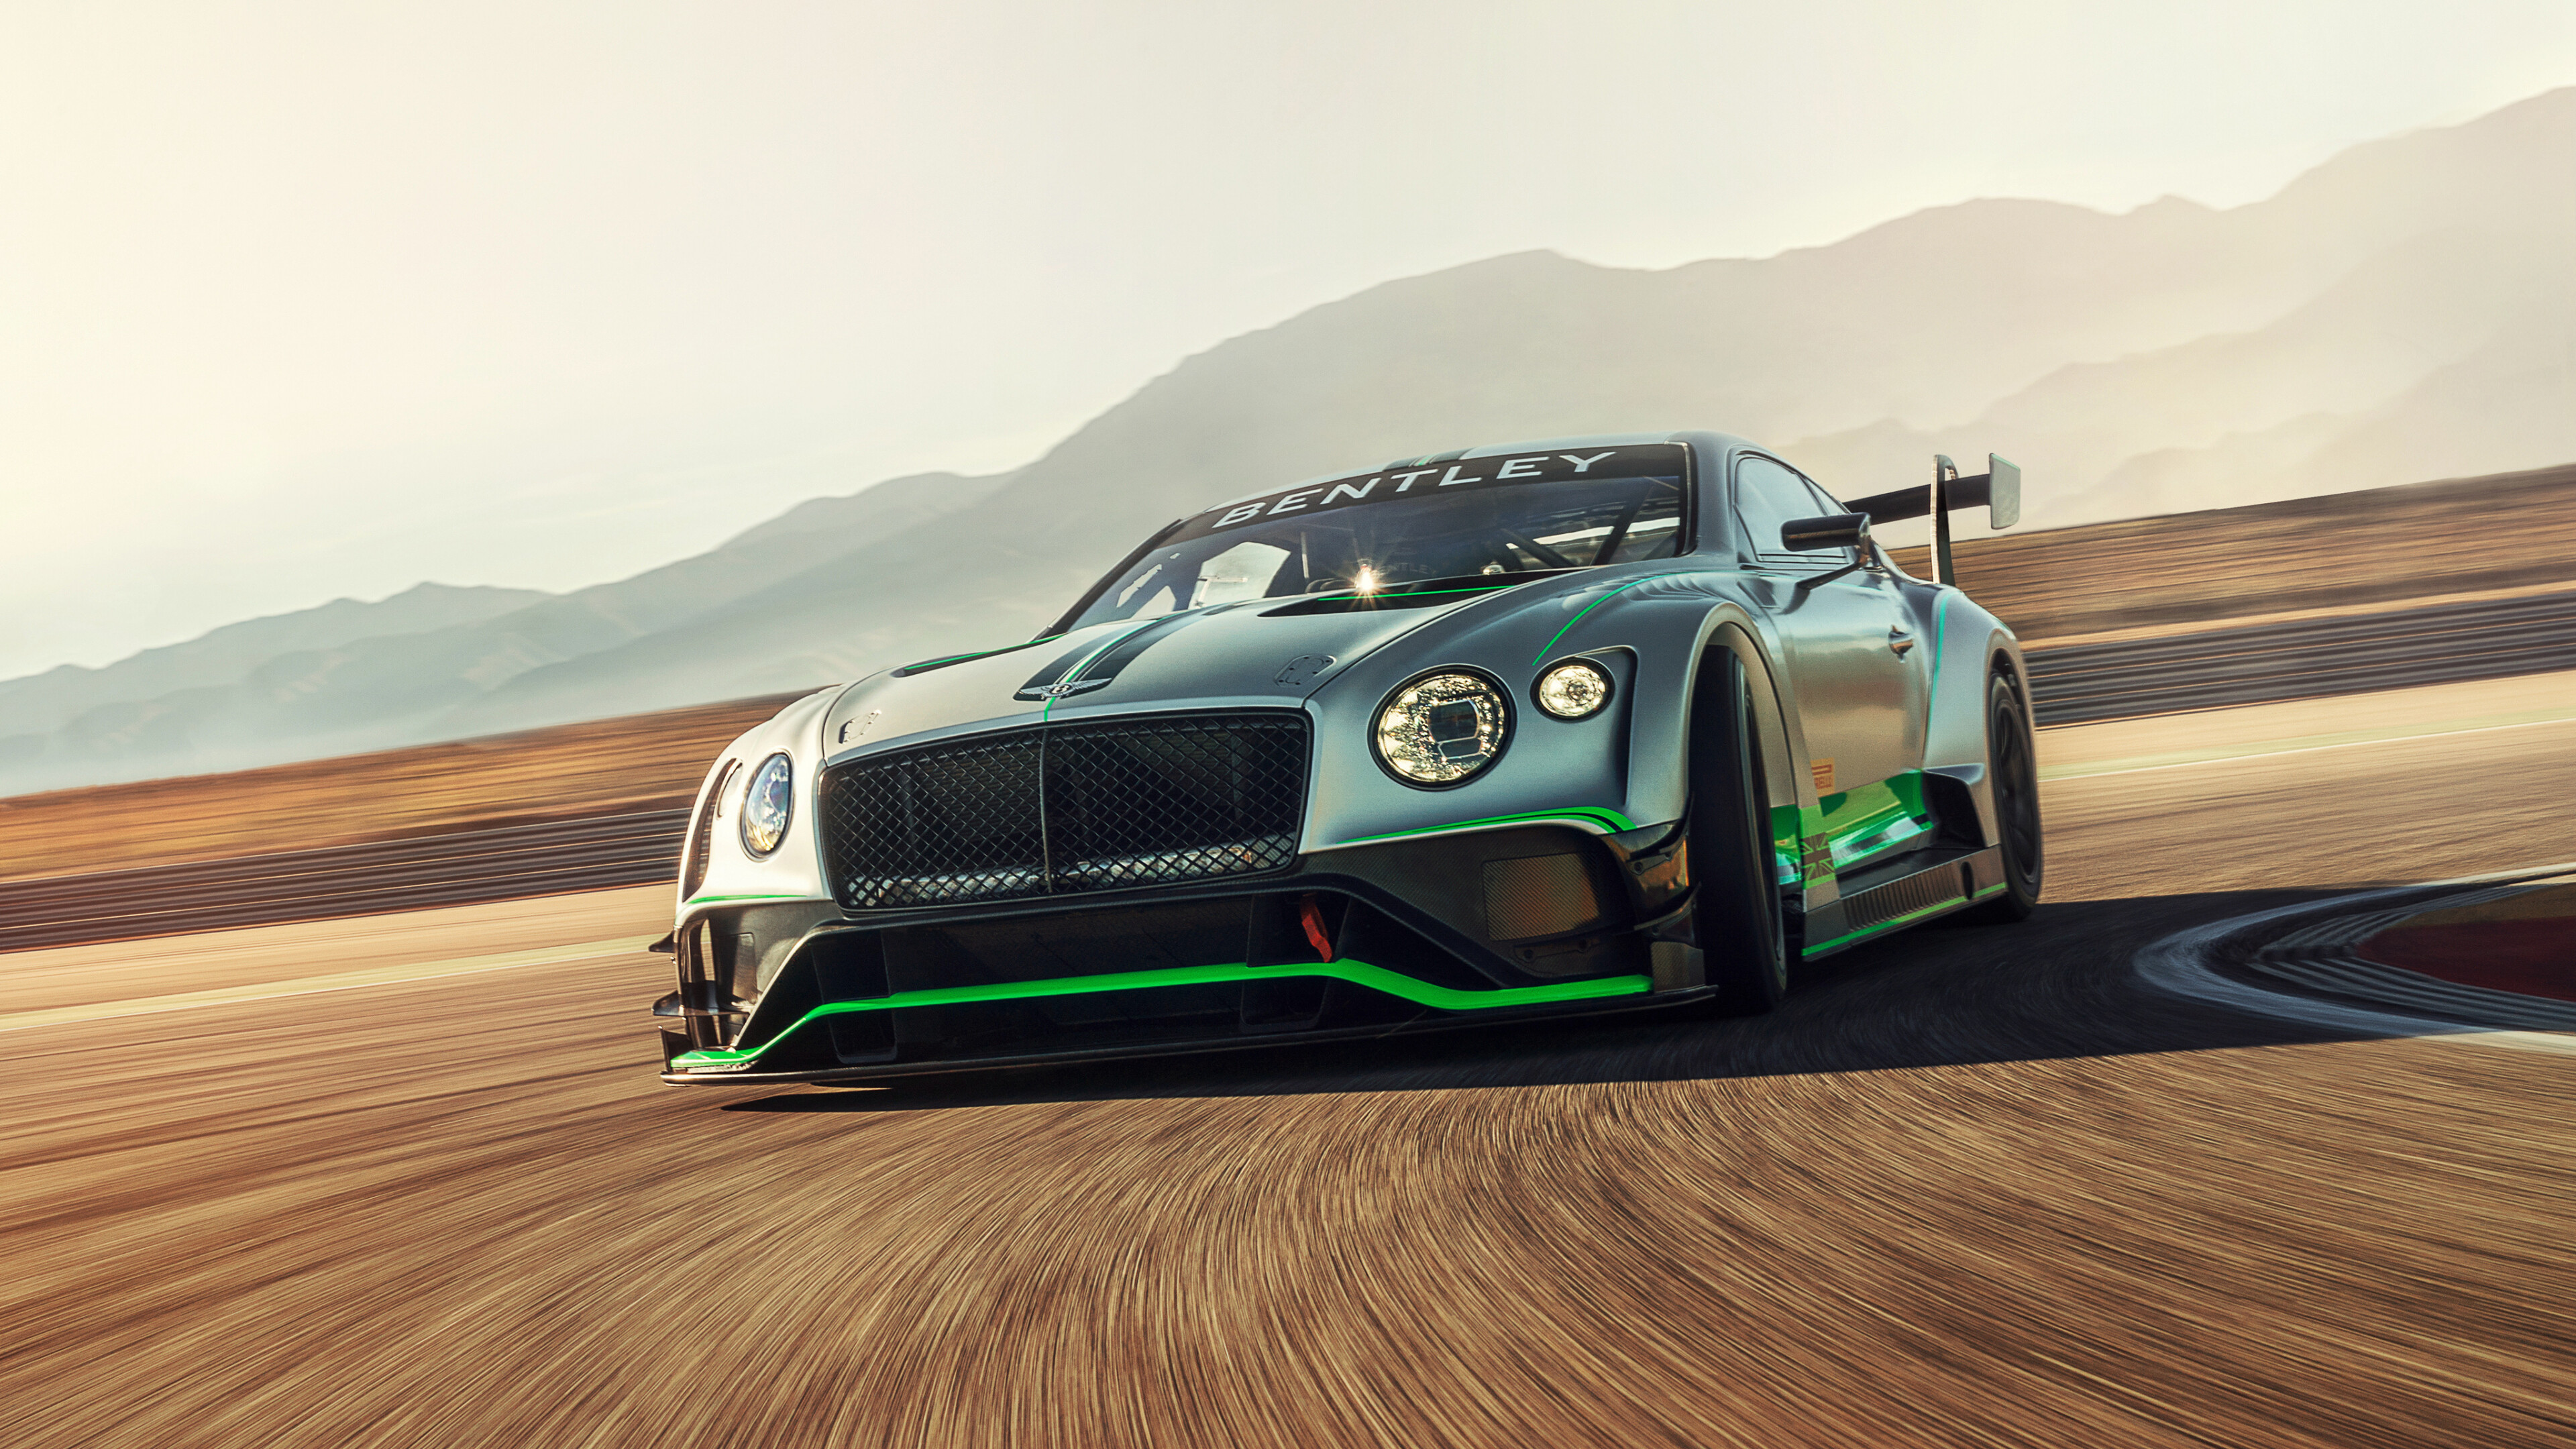 Bentley: GT3 race car, Based on the Continental GT road car. 3840x2160 4K Wallpaper.